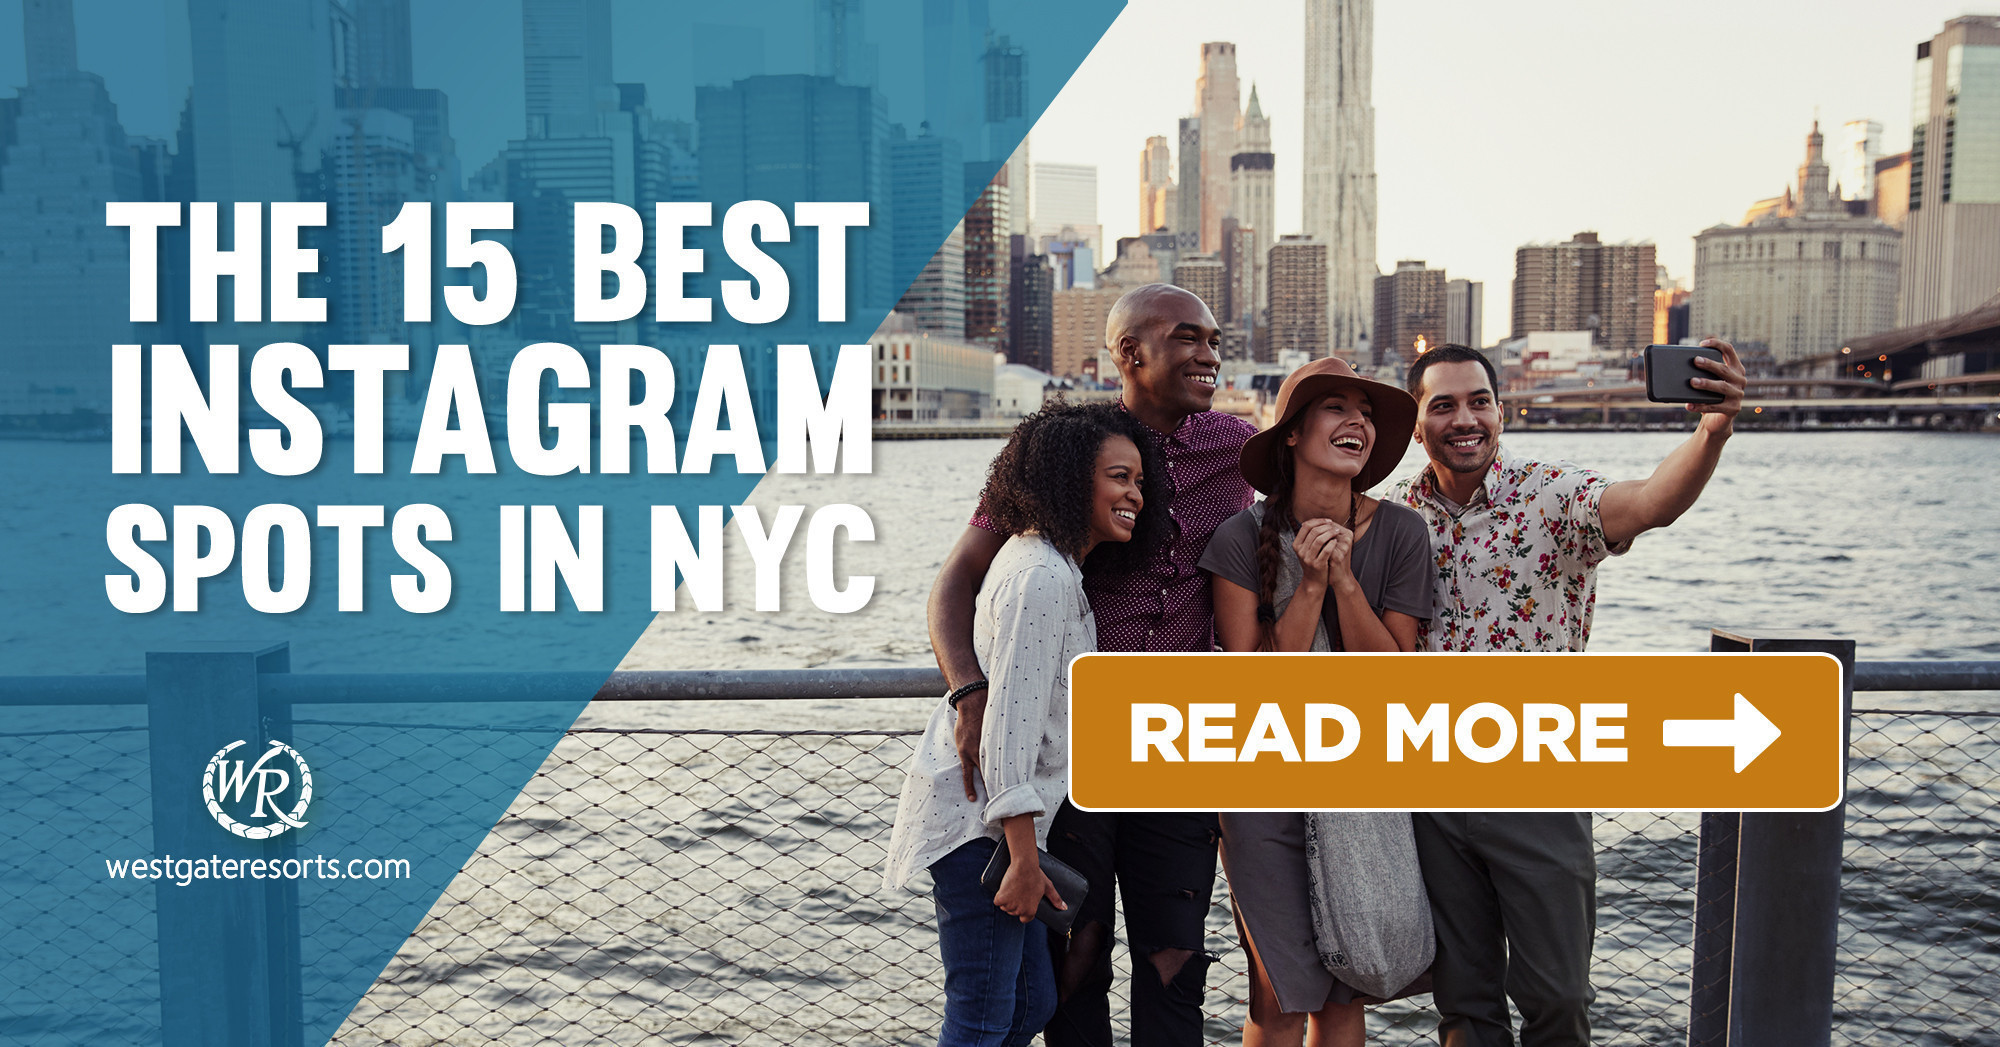 People Trying The 15 Best Instagram Spots In NYC | NYC Instagram Spots Near Westgate New York City